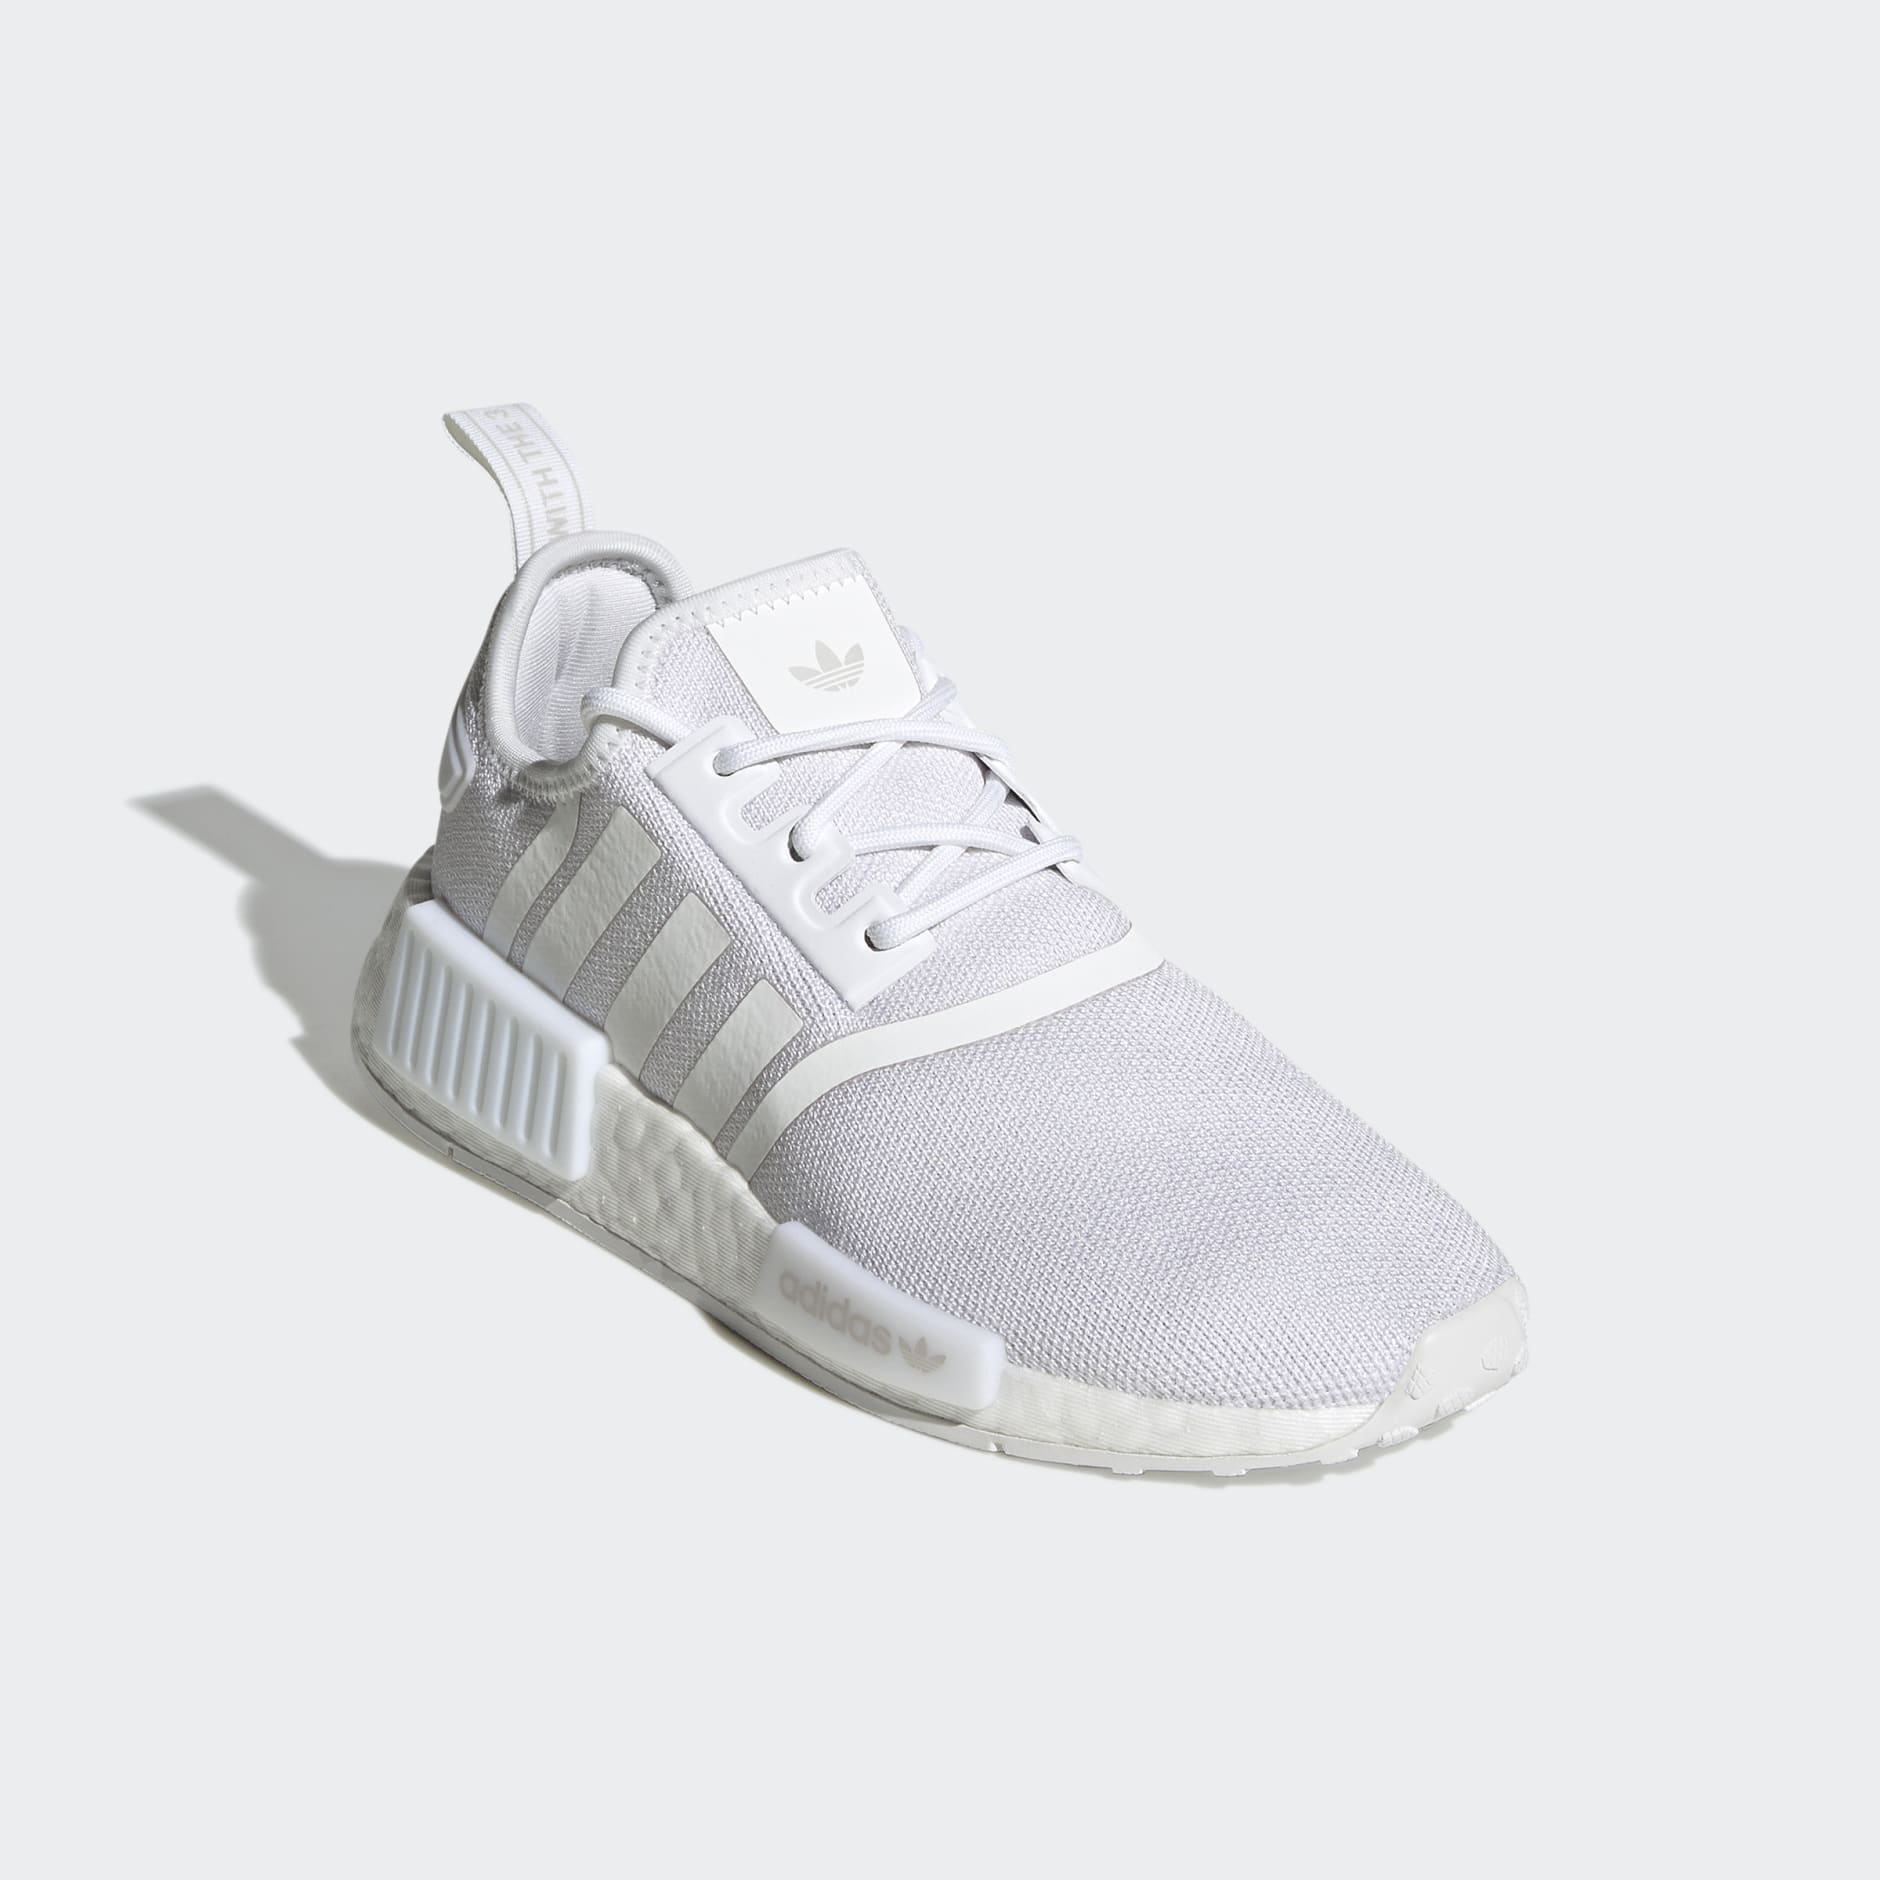 Shoes - NMD_R1 Refined Shoes - White | adidas South Africa